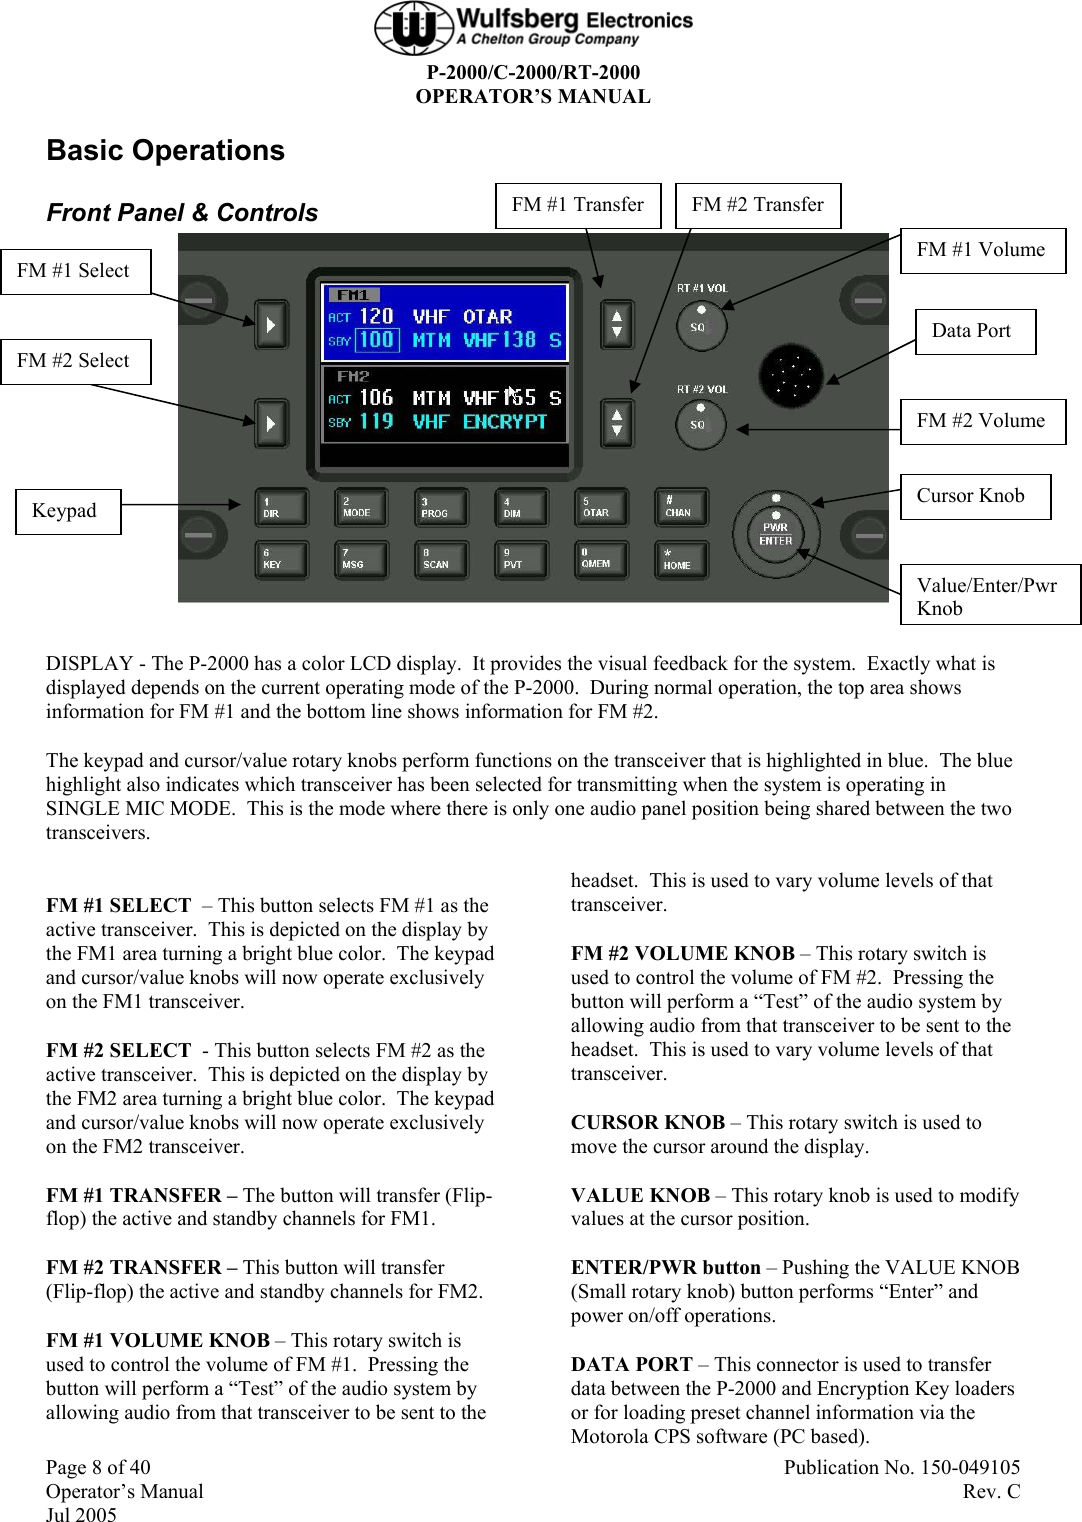  P-2000/C-2000/RT-2000 OPERATOR’S MANUAL Page 8 of 40  Publication No. 150-049105 Operator’s Manual   Rev. C Jul 2005 Basic Operations Front Panel &amp; Controls   DISPLAY - The P-2000 has a color LCD display.  It provides the visual feedback for the system.  Exactly what is displayed depends on the current operating mode of the P-2000.  During normal operation, the top area shows information for FM #1 and the bottom line shows information for FM #2.  The keypad and cursor/value rotary knobs perform functions on the transceiver that is highlighted in blue.  The blue highlight also indicates which transceiver has been selected for transmitting when the system is operating in SINGLE MIC MODE.  This is the mode where there is only one audio panel position being shared between the two transceivers.  FM #1 SELECT  – This button selects FM #1 as the active transceiver.  This is depicted on the display by the FM1 area turning a bright blue color.  The keypad and cursor/value knobs will now operate exclusively on the FM1 transceiver. FM #2 SELECT  - This button selects FM #2 as the active transceiver.  This is depicted on the display by the FM2 area turning a bright blue color.  The keypad and cursor/value knobs will now operate exclusively on the FM2 transceiver. FM #1 TRANSFER – The button will transfer (Flip-flop) the active and standby channels for FM1. FM #2 TRANSFER – This button will transfer (Flip-flop) the active and standby channels for FM2. FM #1 VOLUME KNOB – This rotary switch is used to control the volume of FM #1.  Pressing the button will perform a “Test” of the audio system by allowing audio from that transceiver to be sent to the headset.  This is used to vary volume levels of that transceiver.   FM #2 VOLUME KNOB – This rotary switch is used to control the volume of FM #2.  Pressing the button will perform a “Test” of the audio system by allowing audio from that transceiver to be sent to the headset.  This is used to vary volume levels of that transceiver.   CURSOR KNOB – This rotary switch is used to move the cursor around the display. VALUE KNOB – This rotary knob is used to modify values at the cursor position.  ENTER/PWR button – Pushing the VALUE KNOB (Small rotary knob) button performs “Enter” and power on/off operations. DATA PORT – This connector is used to transfer data between the P-2000 and Encryption Key loaders or for loading preset channel information via the Motorola CPS software (PC based). FM #1 Select FM #2 Select FM #1 Volume FM #2 Volume Data Port Cursor Knob Keypad FM #1 Transfer FM #2 Transfer Value/Enter/Pwr Knob